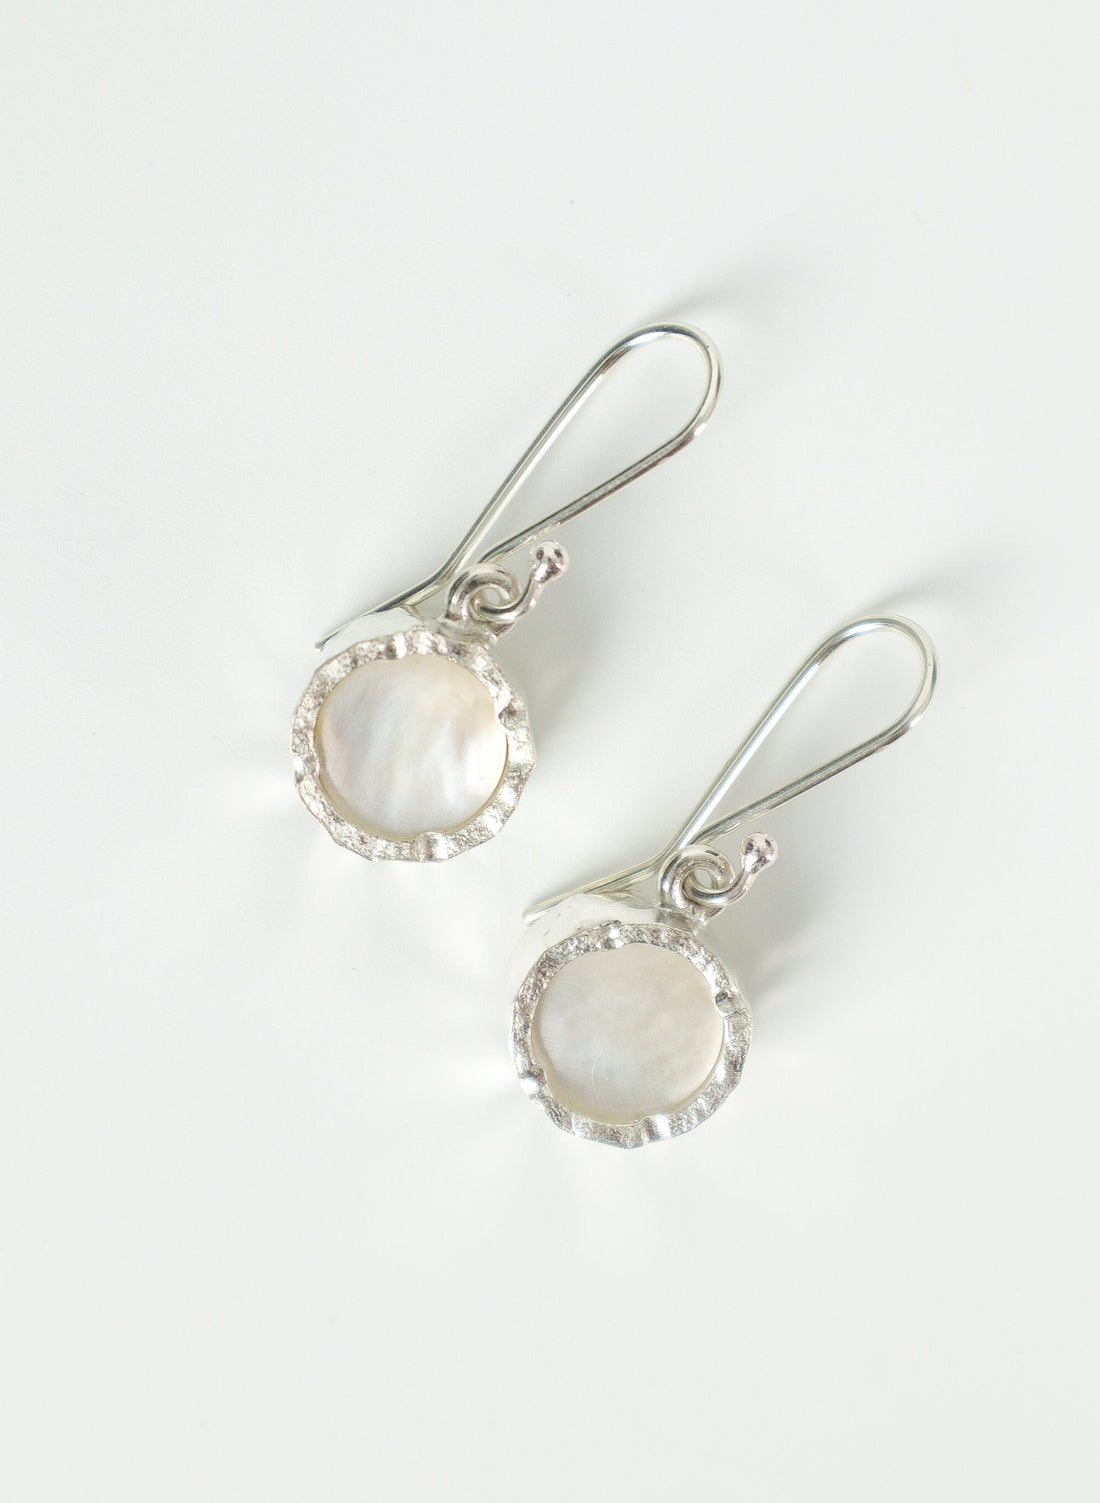 Round Mother of Pearl Earrings - Sterling Silver